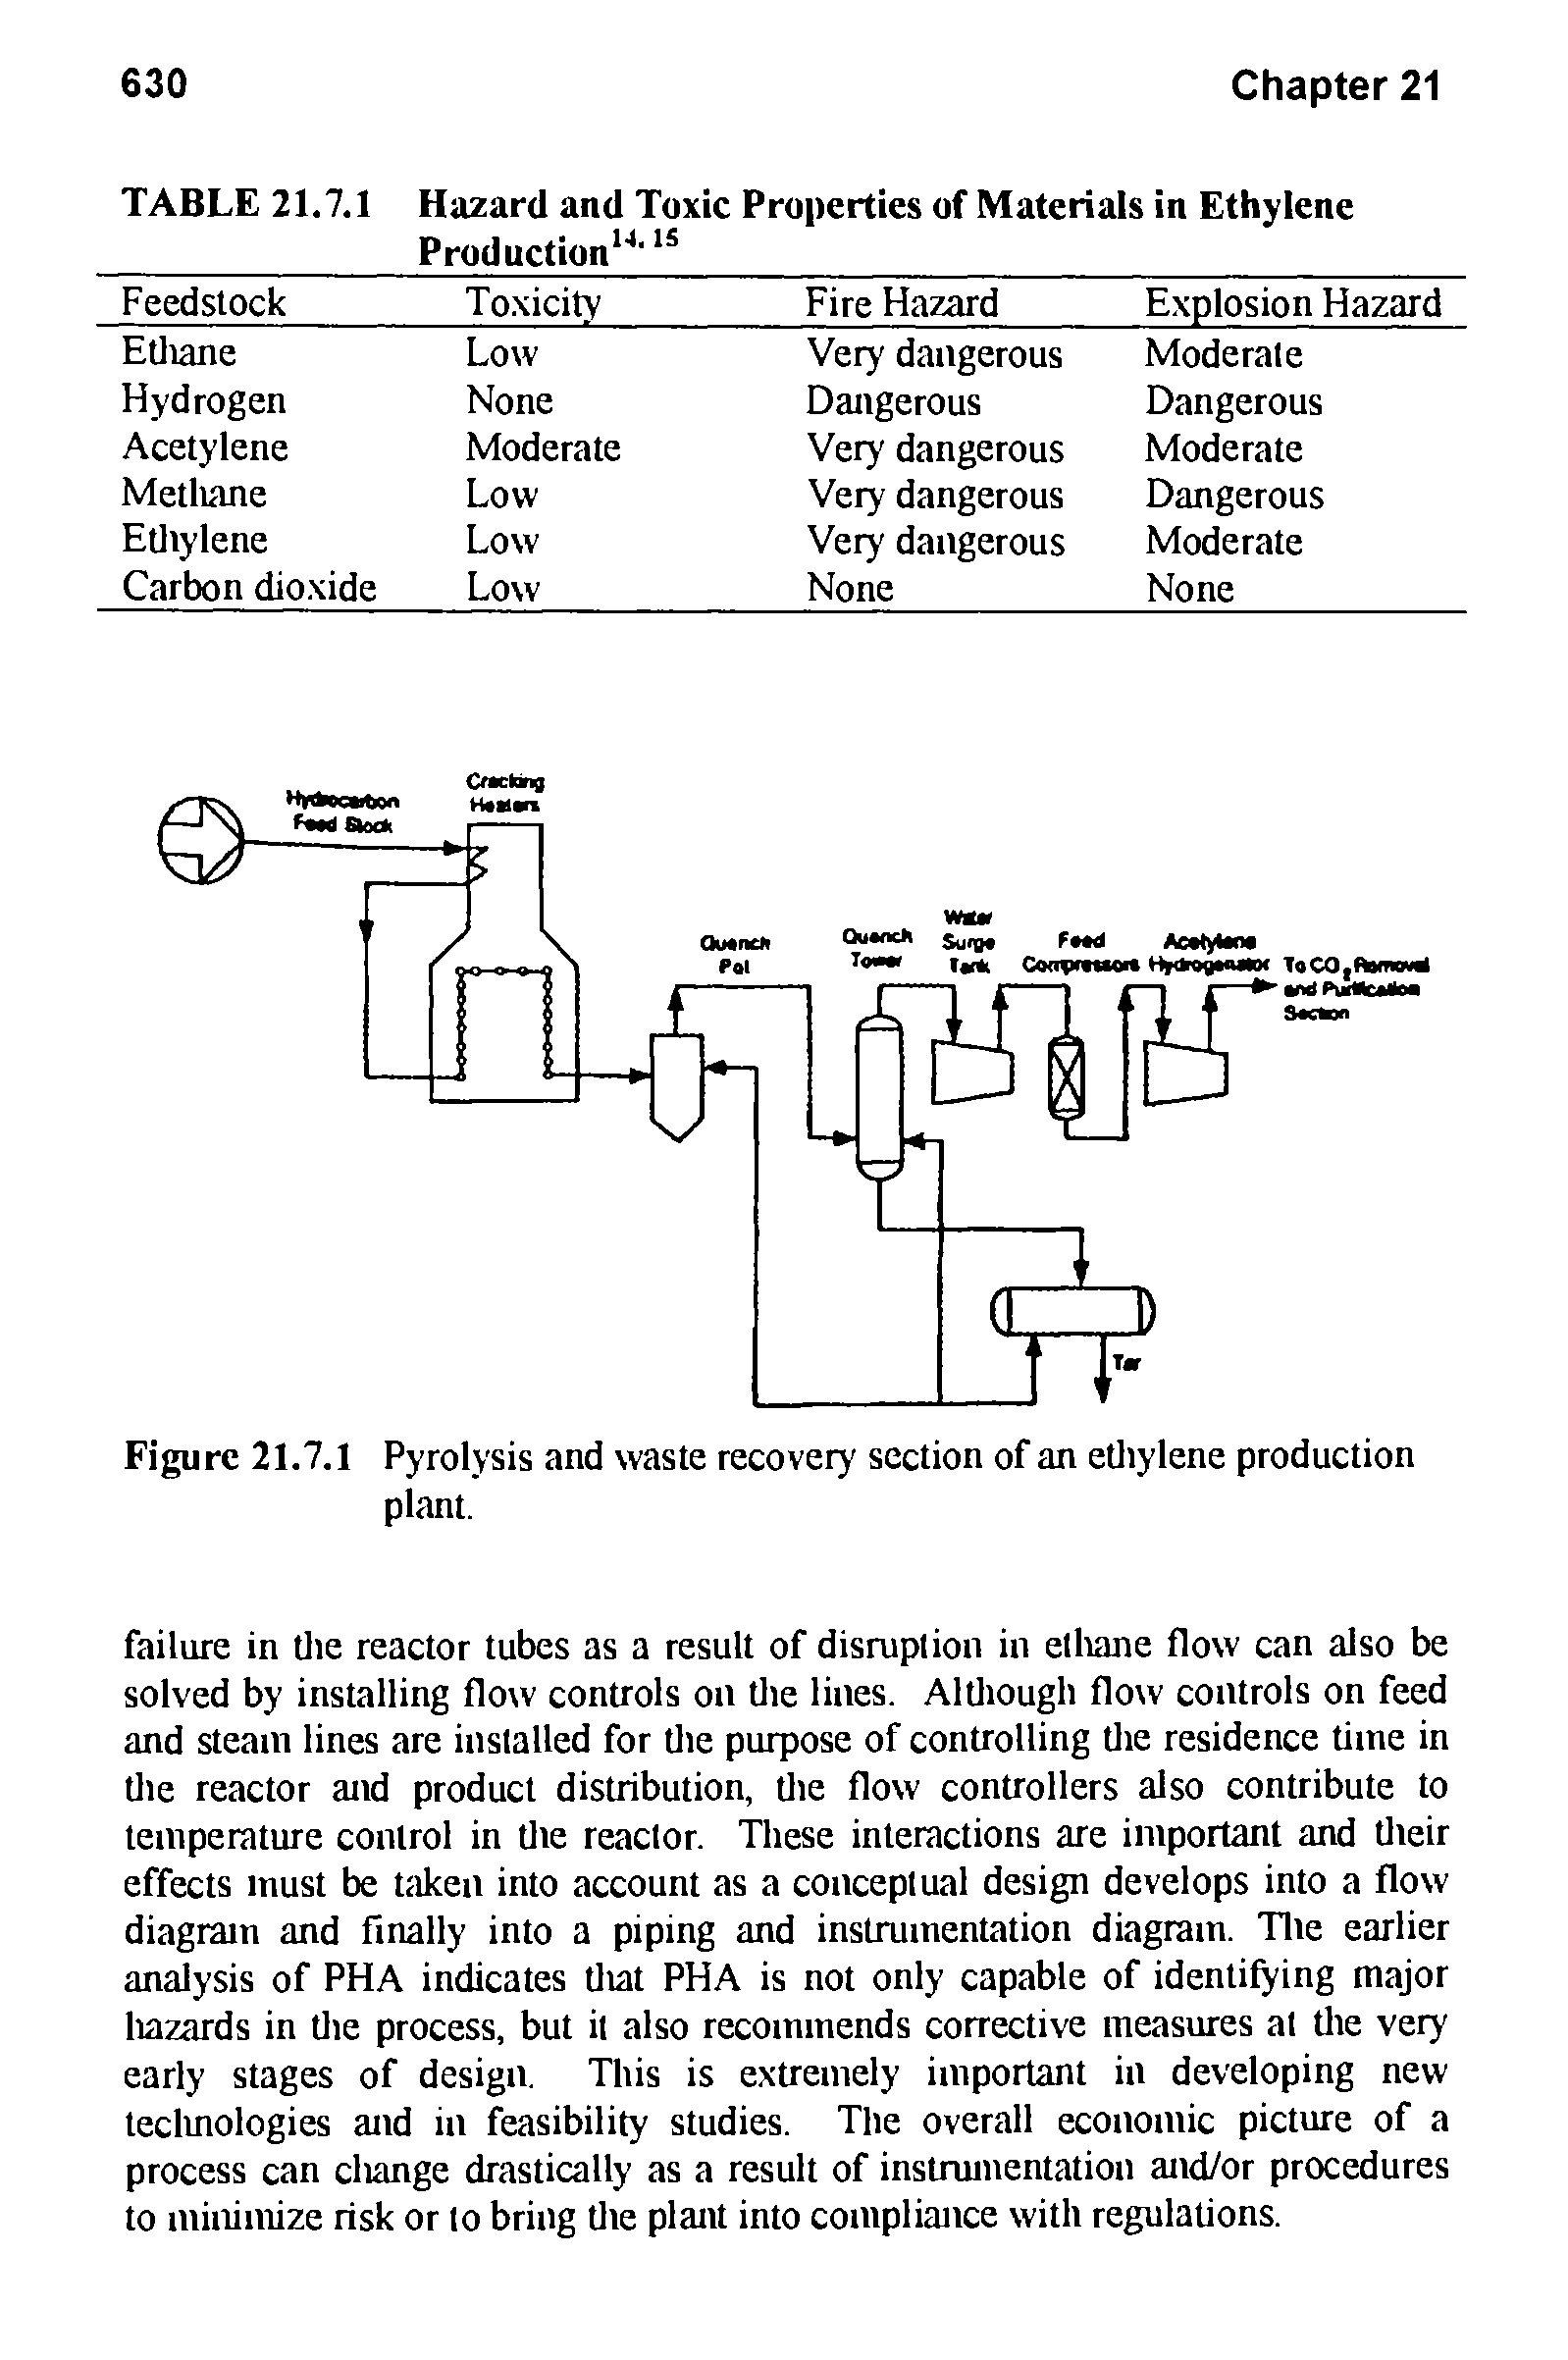 Figure 21.7.1 Pyrolysis and waste recovery section of an etliylene production plant.